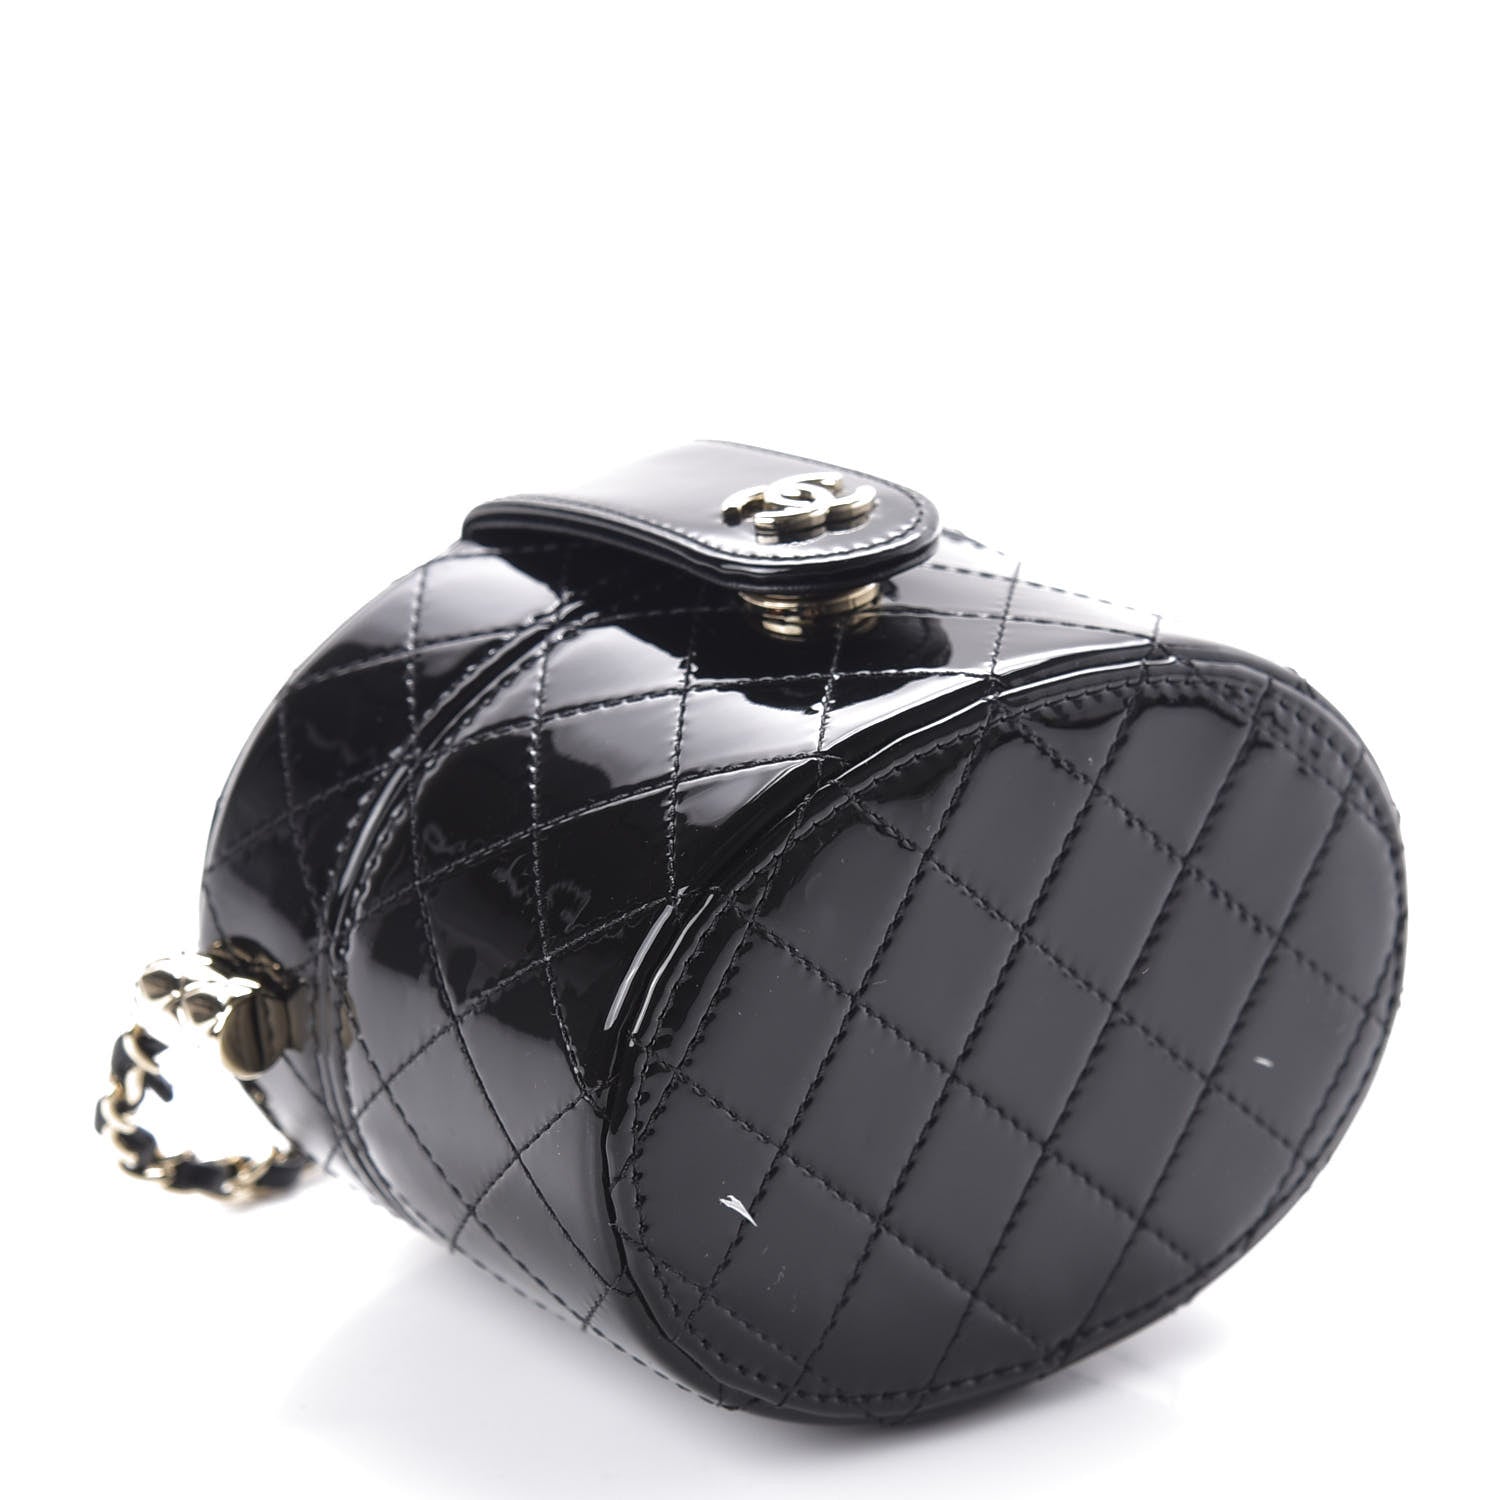 Lot - Mini CHANEL Black Quilted Patent Leather Bag